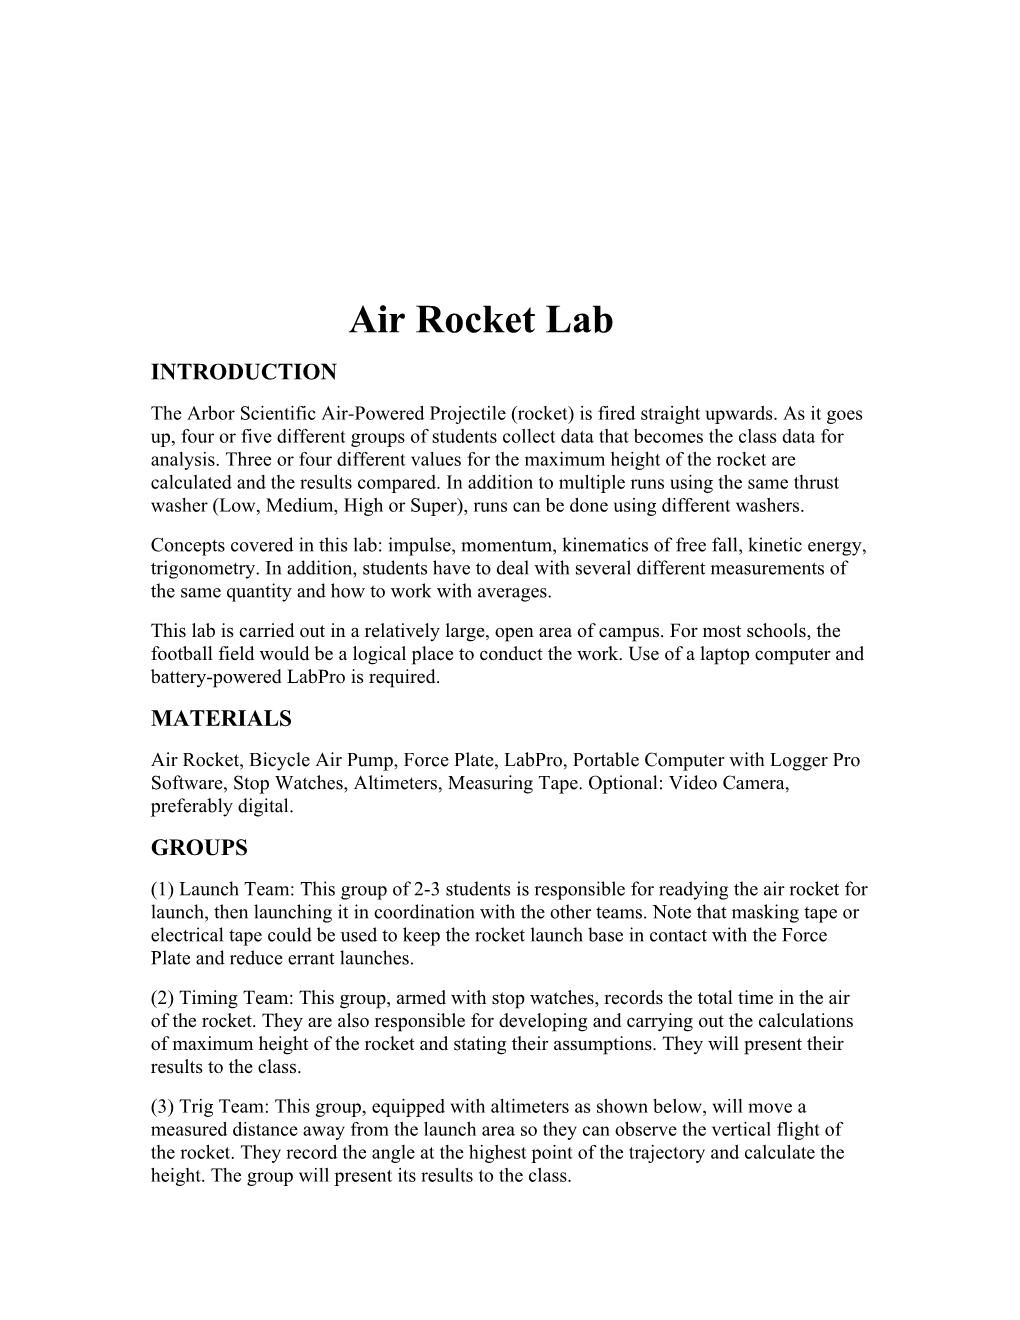 Air Rocket Lab for a Class